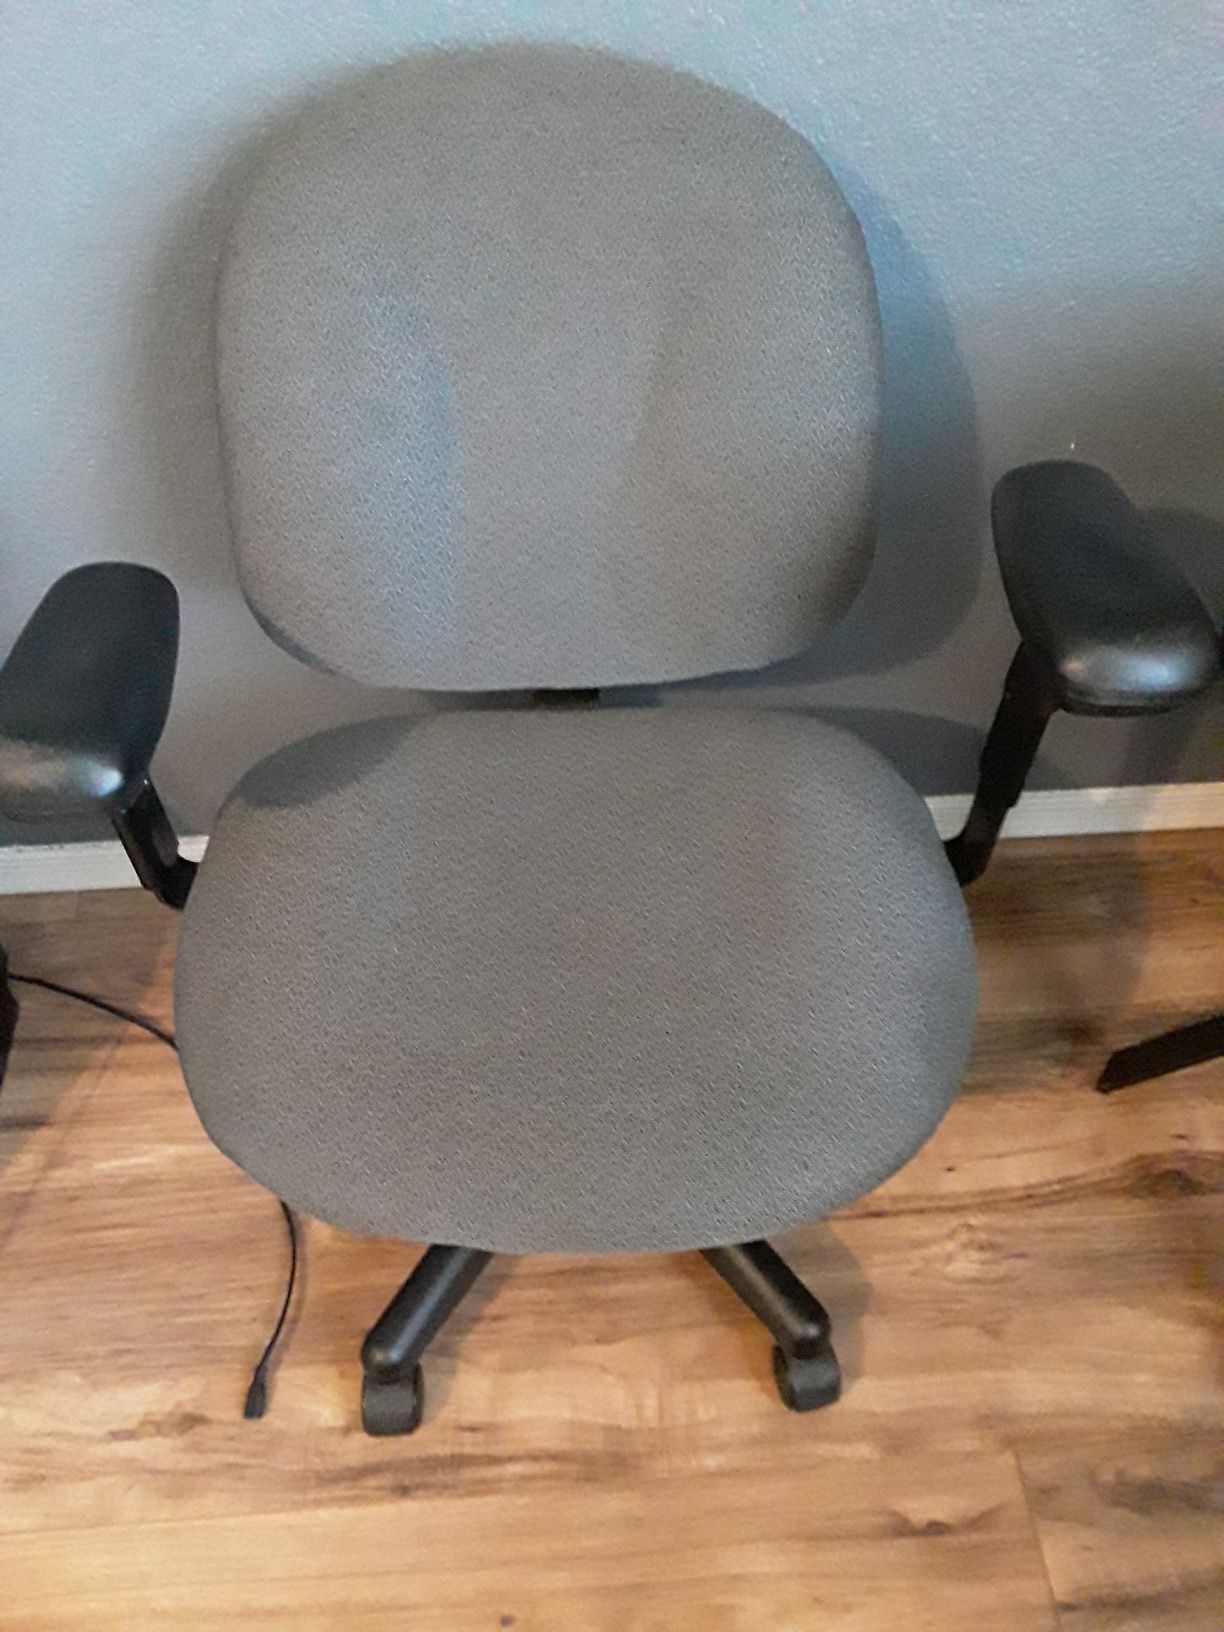 Wonderful office chair swivels goes up and down